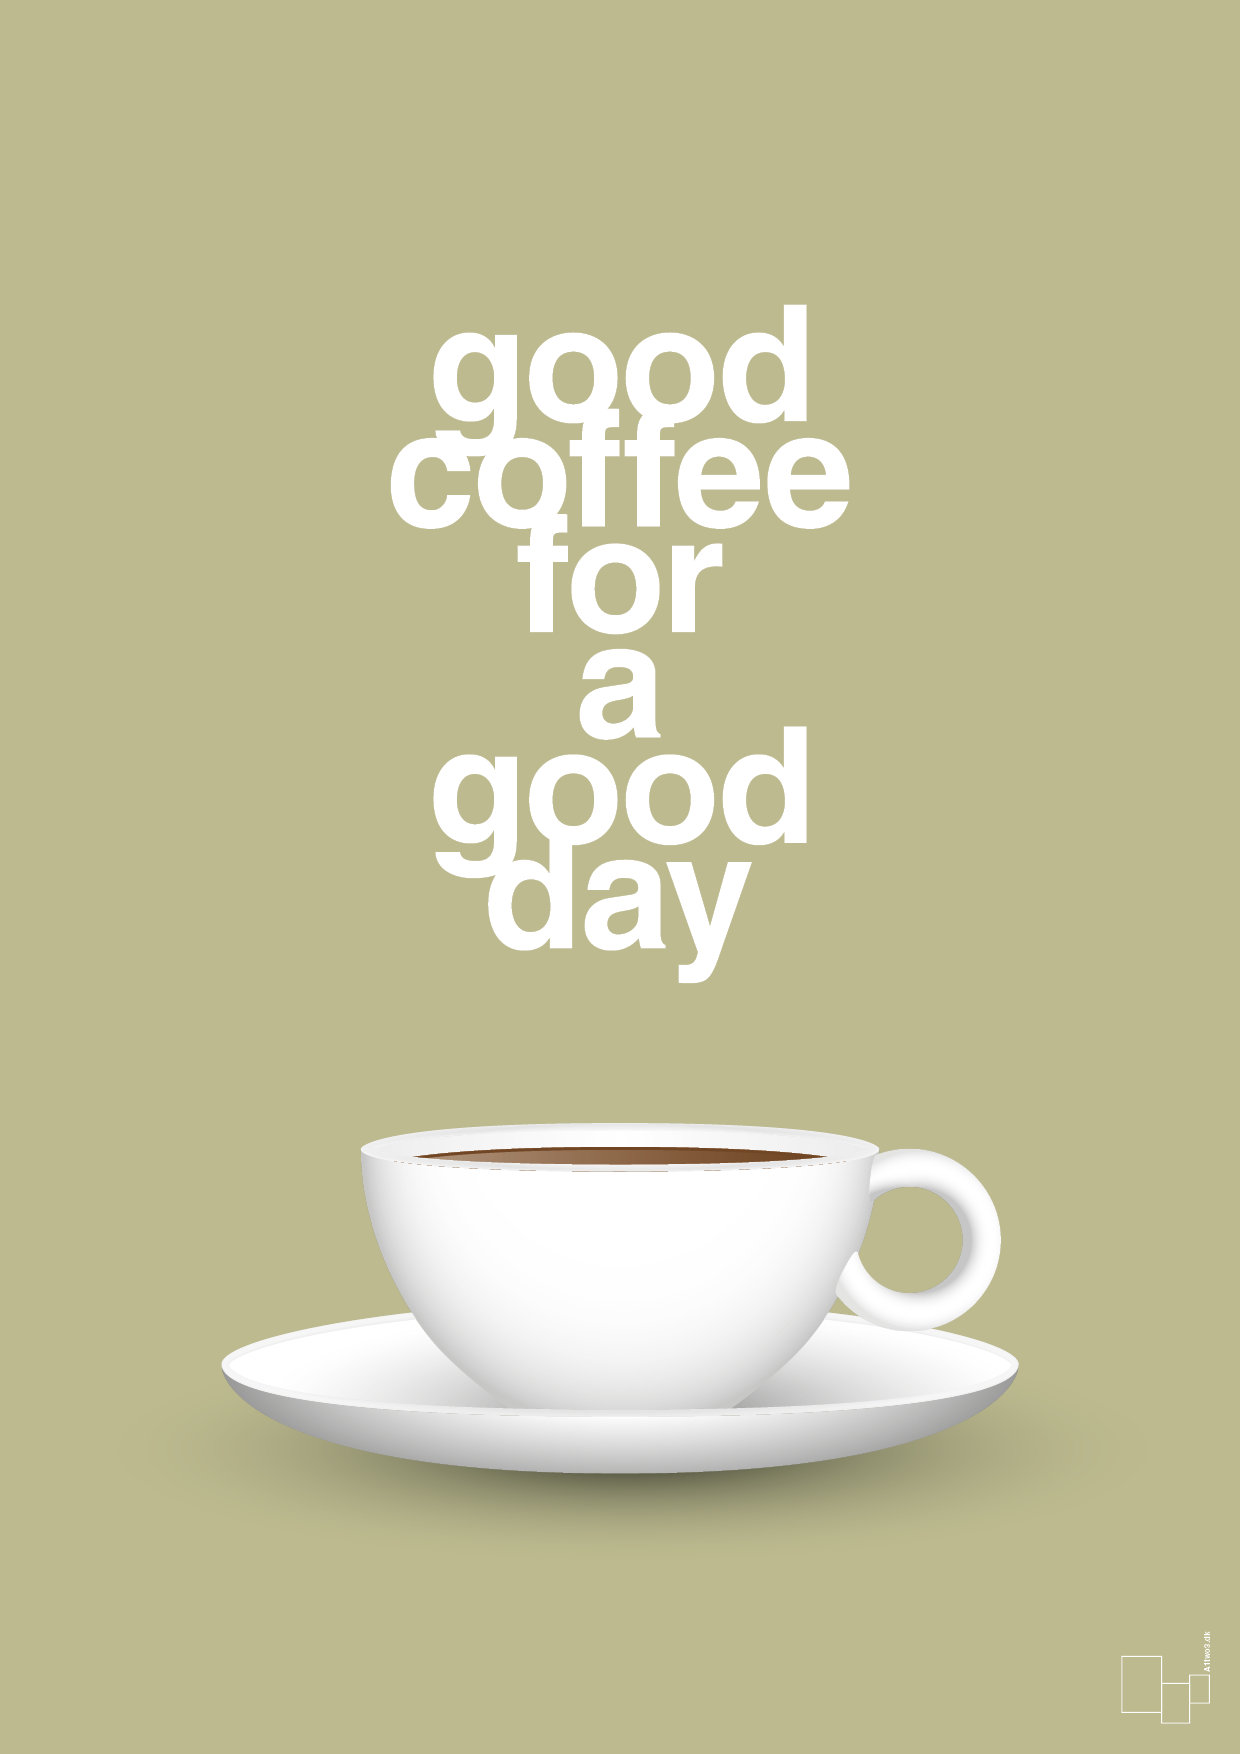 good coffee for a good day - Plakat med Mad & Drikke i Back to Nature